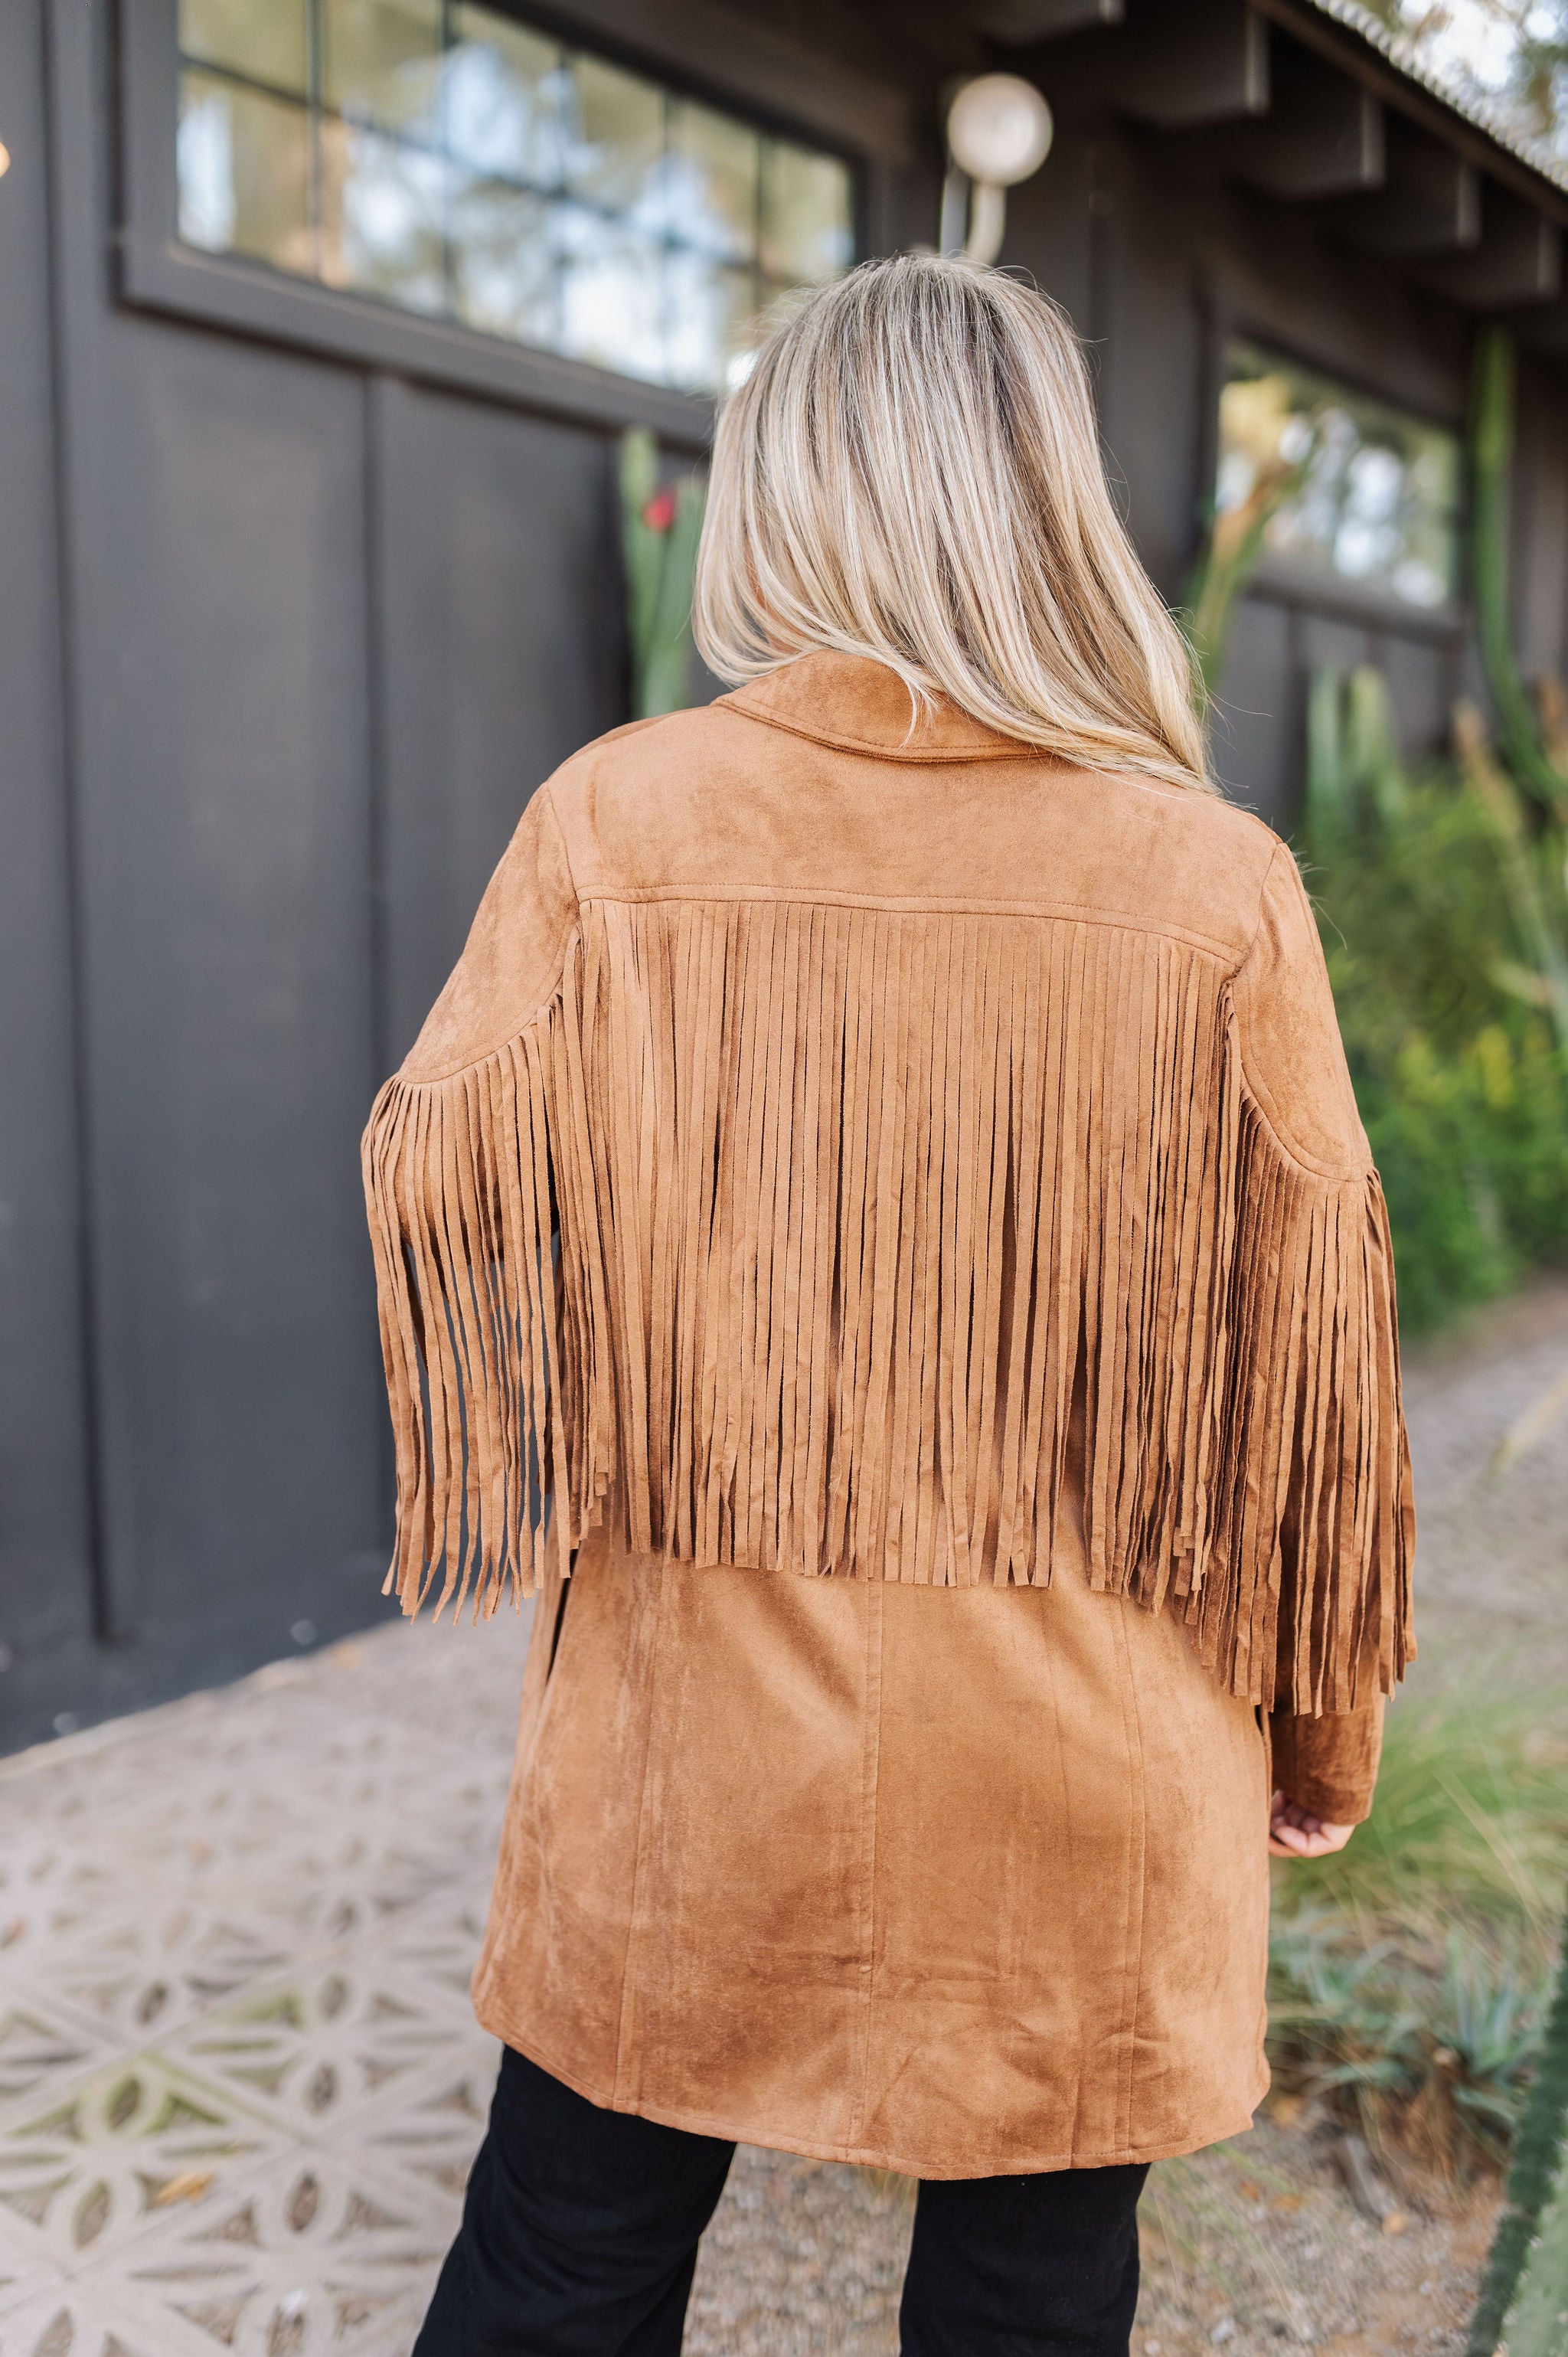 Rear view of Dutton Fringe Suede Jacket in cocoa with fringe detailing at chest and arms.  